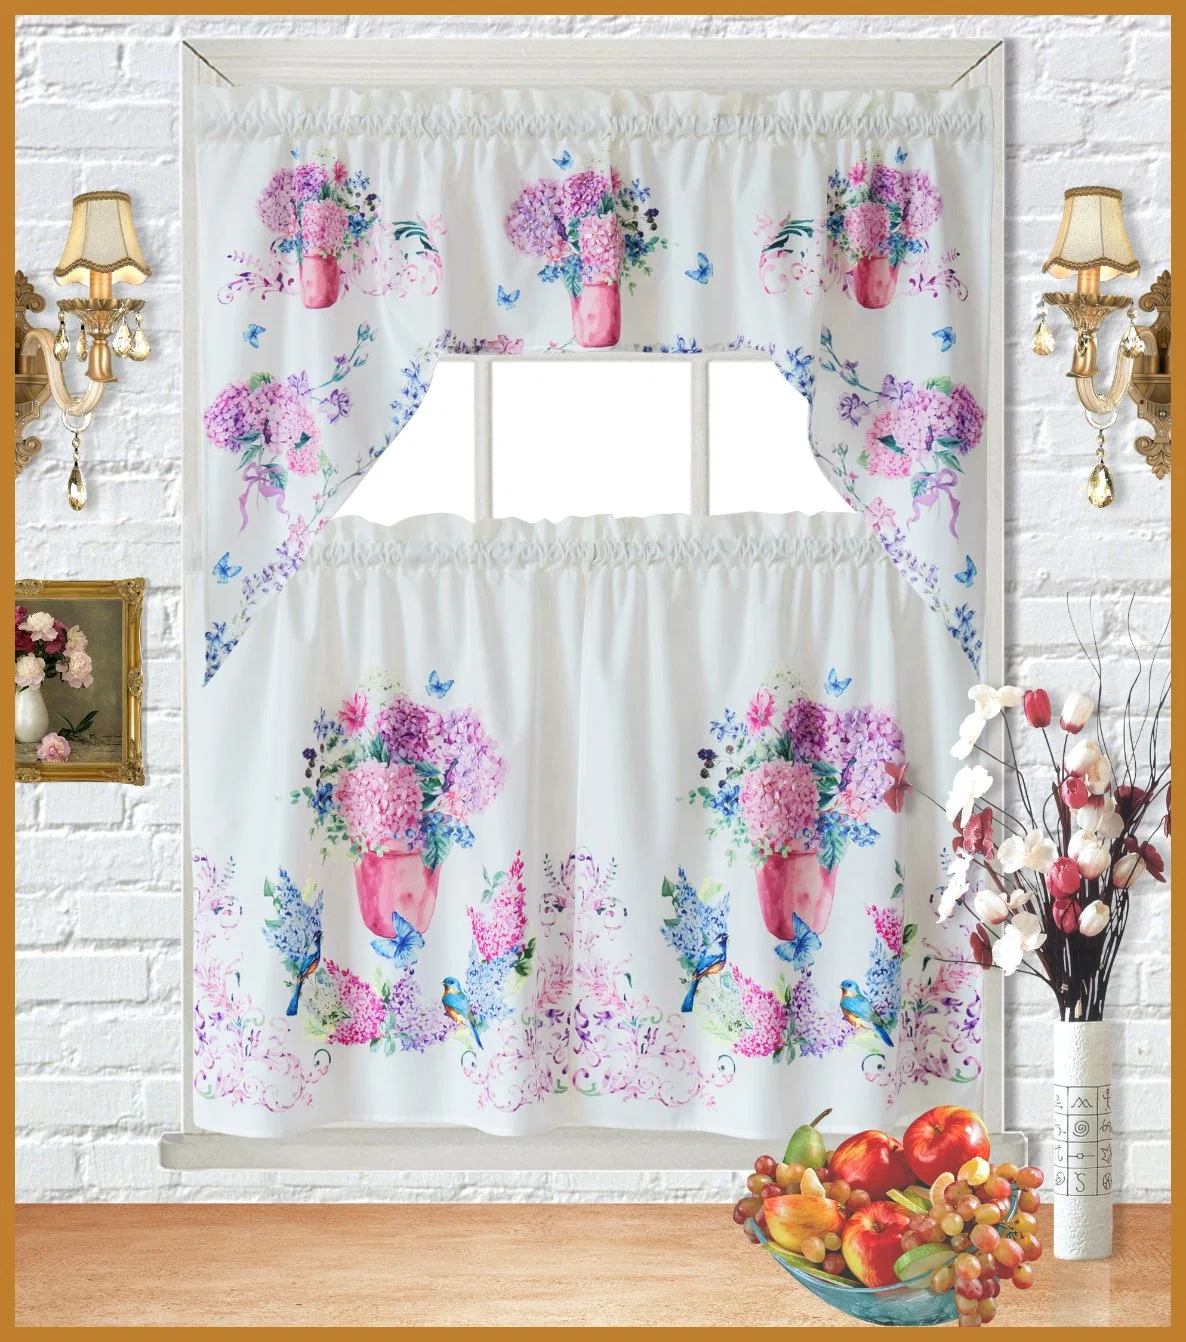 Flowers Ribbion Embroidery White Cloth Fabric Home Decoration Swag Window Kitchen Curtain